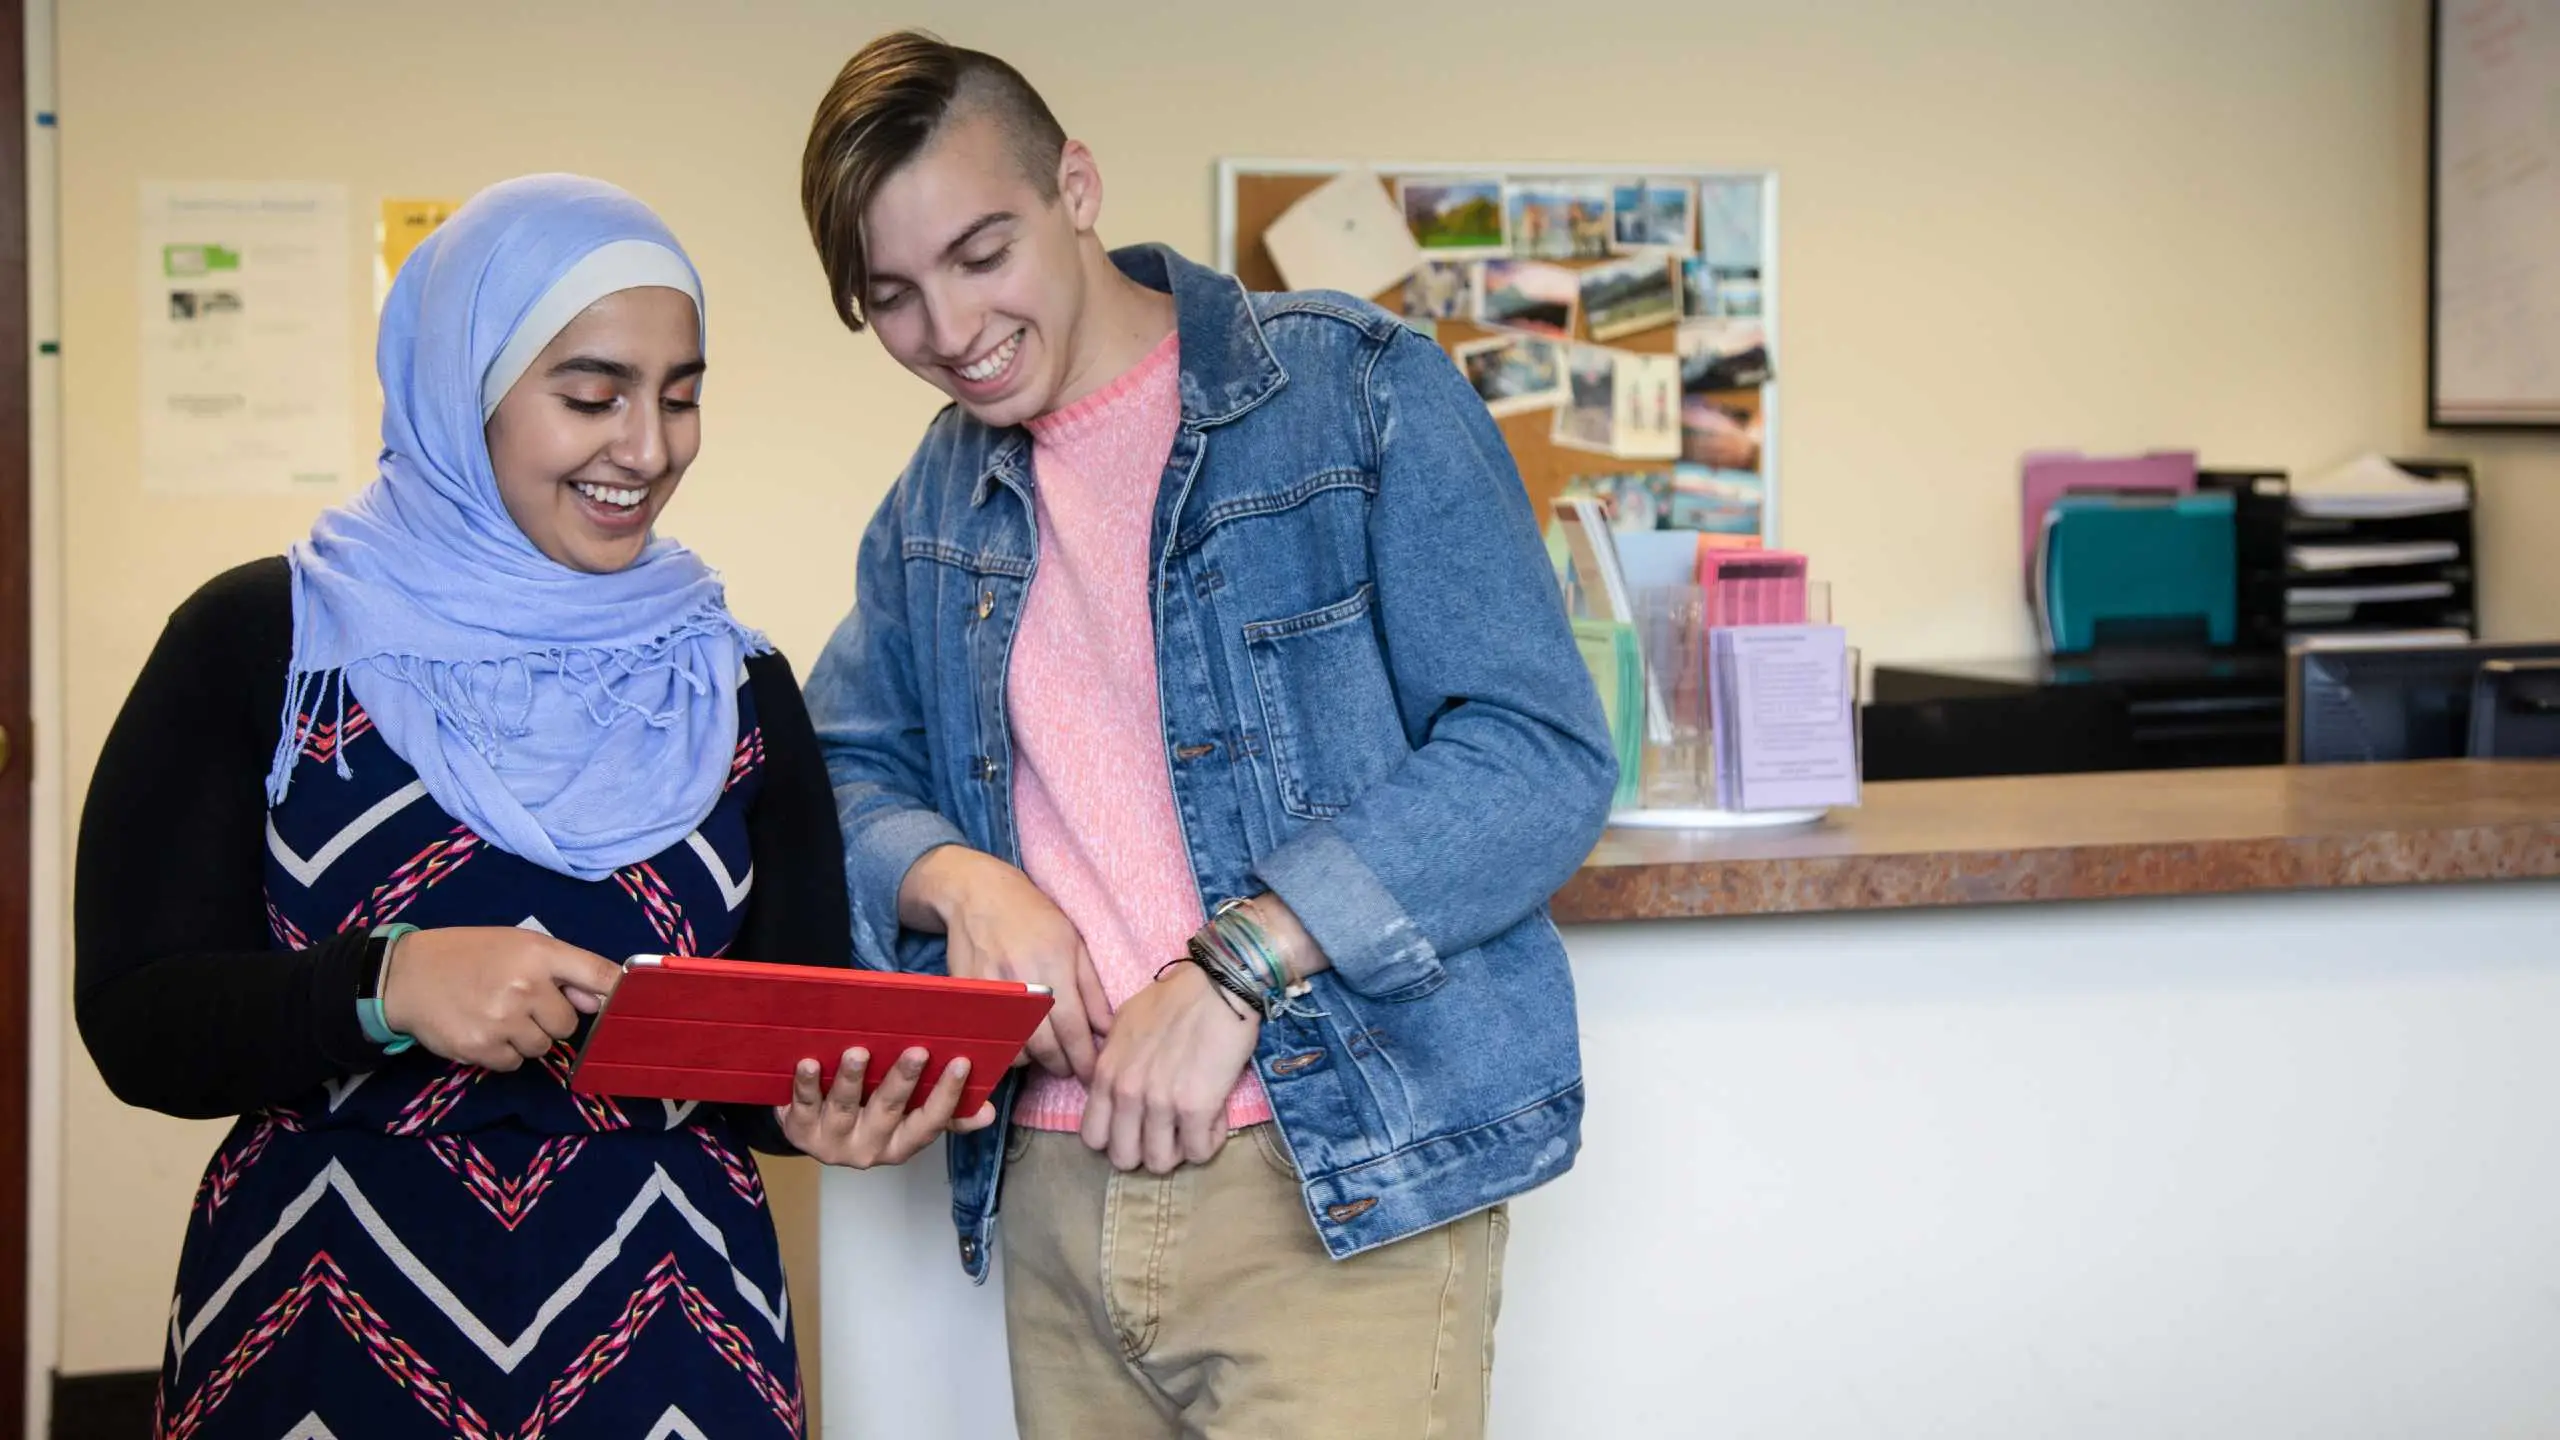 Two students standing while leaning on a counter, smiling at a tablet device